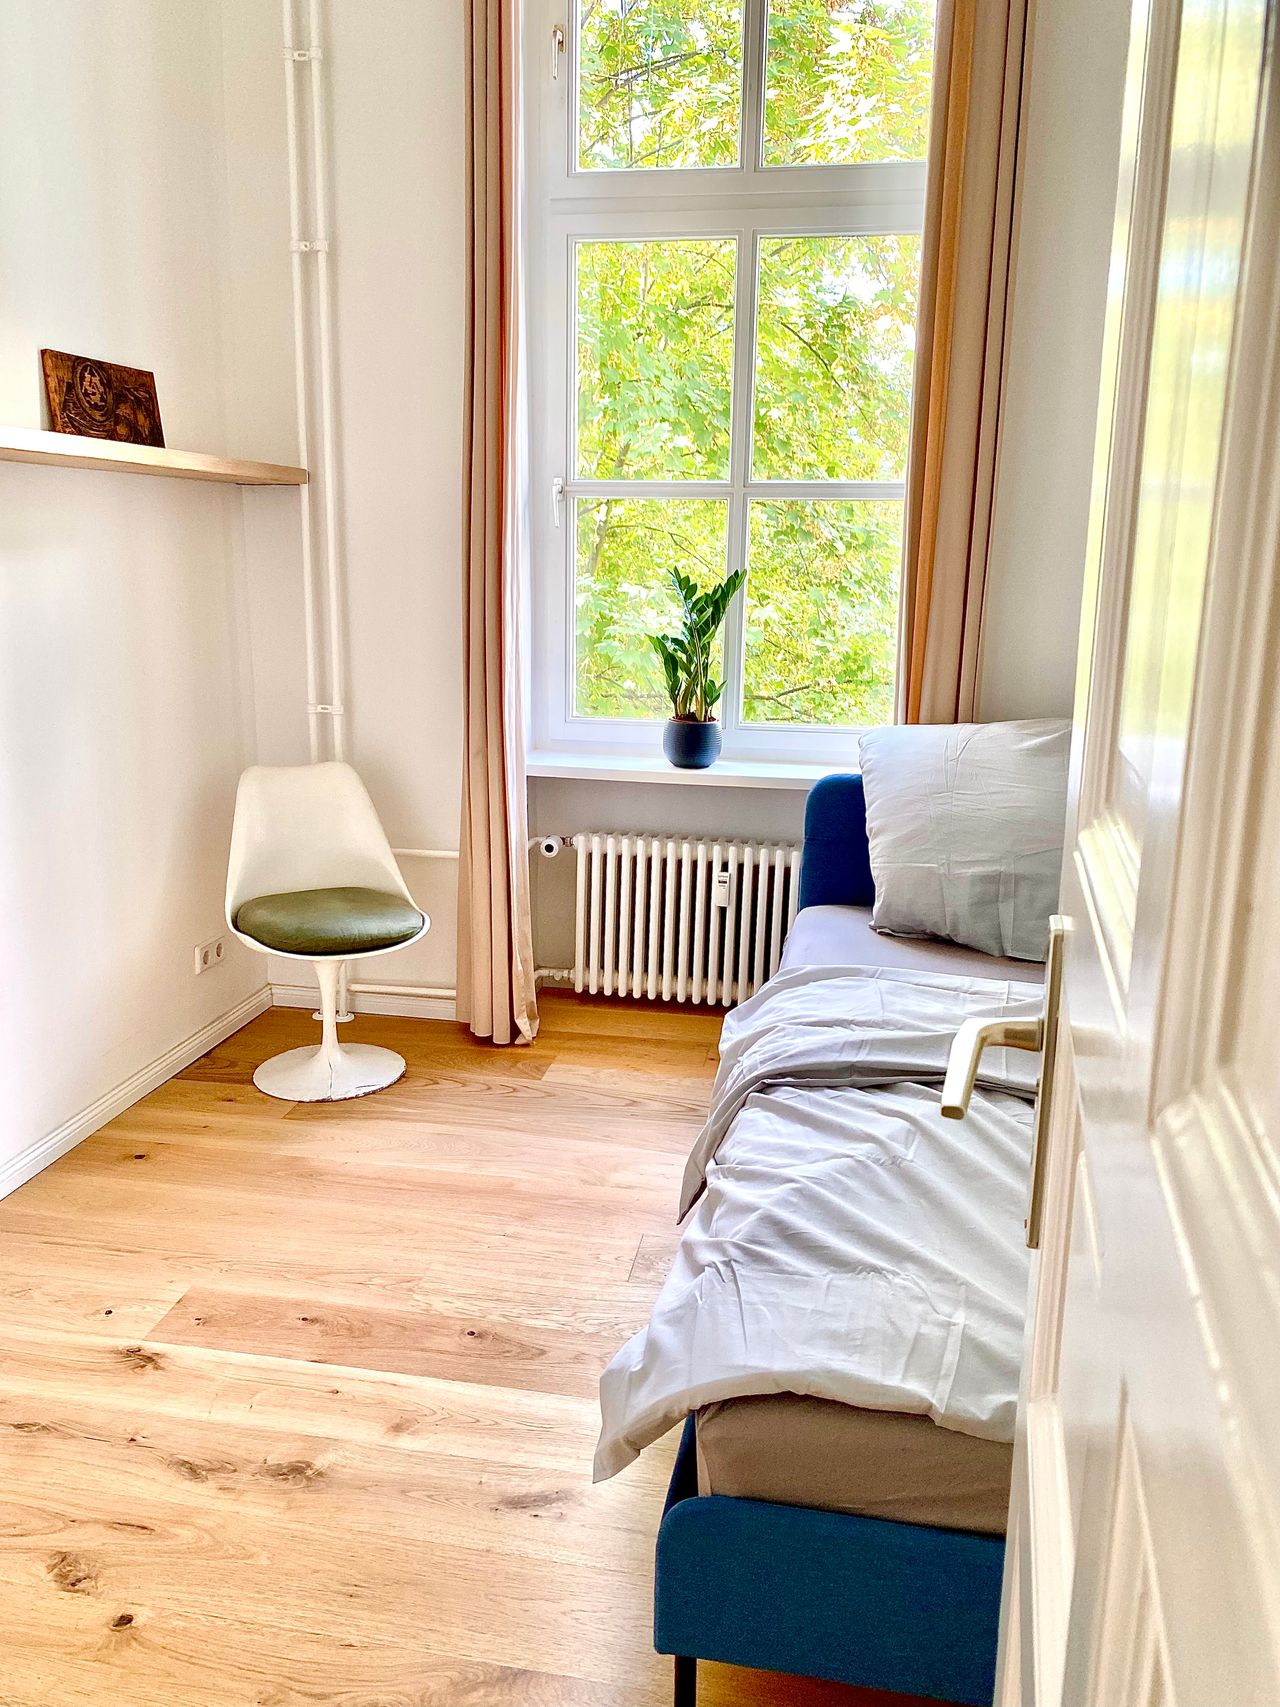 Wonderful apartment in a classified monument building in a central location in Berlin - Schöneberg